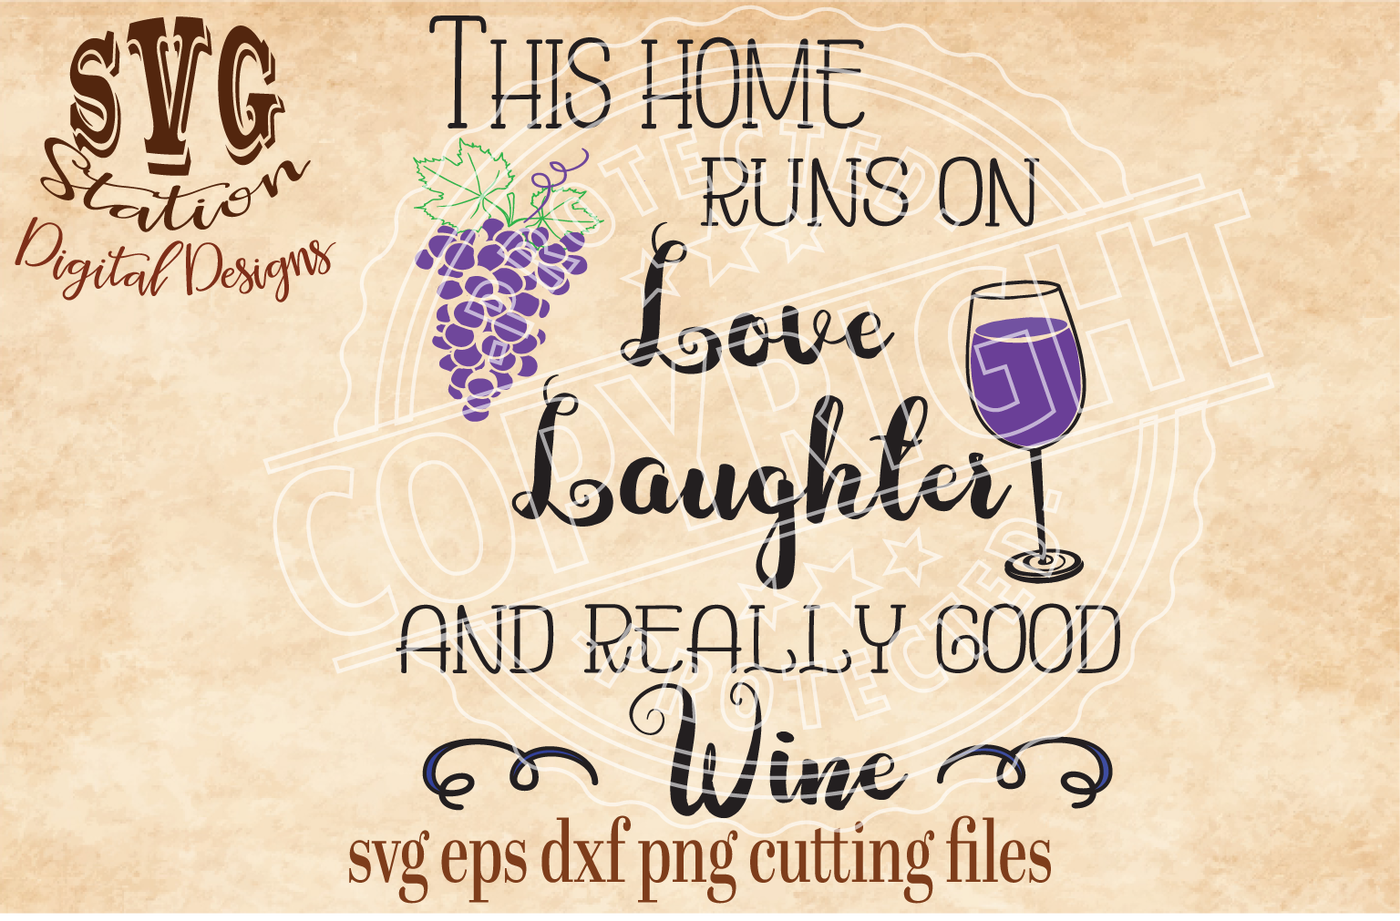 Download This Home Runs On Love Laughter and Really Good Wine / SVG ...